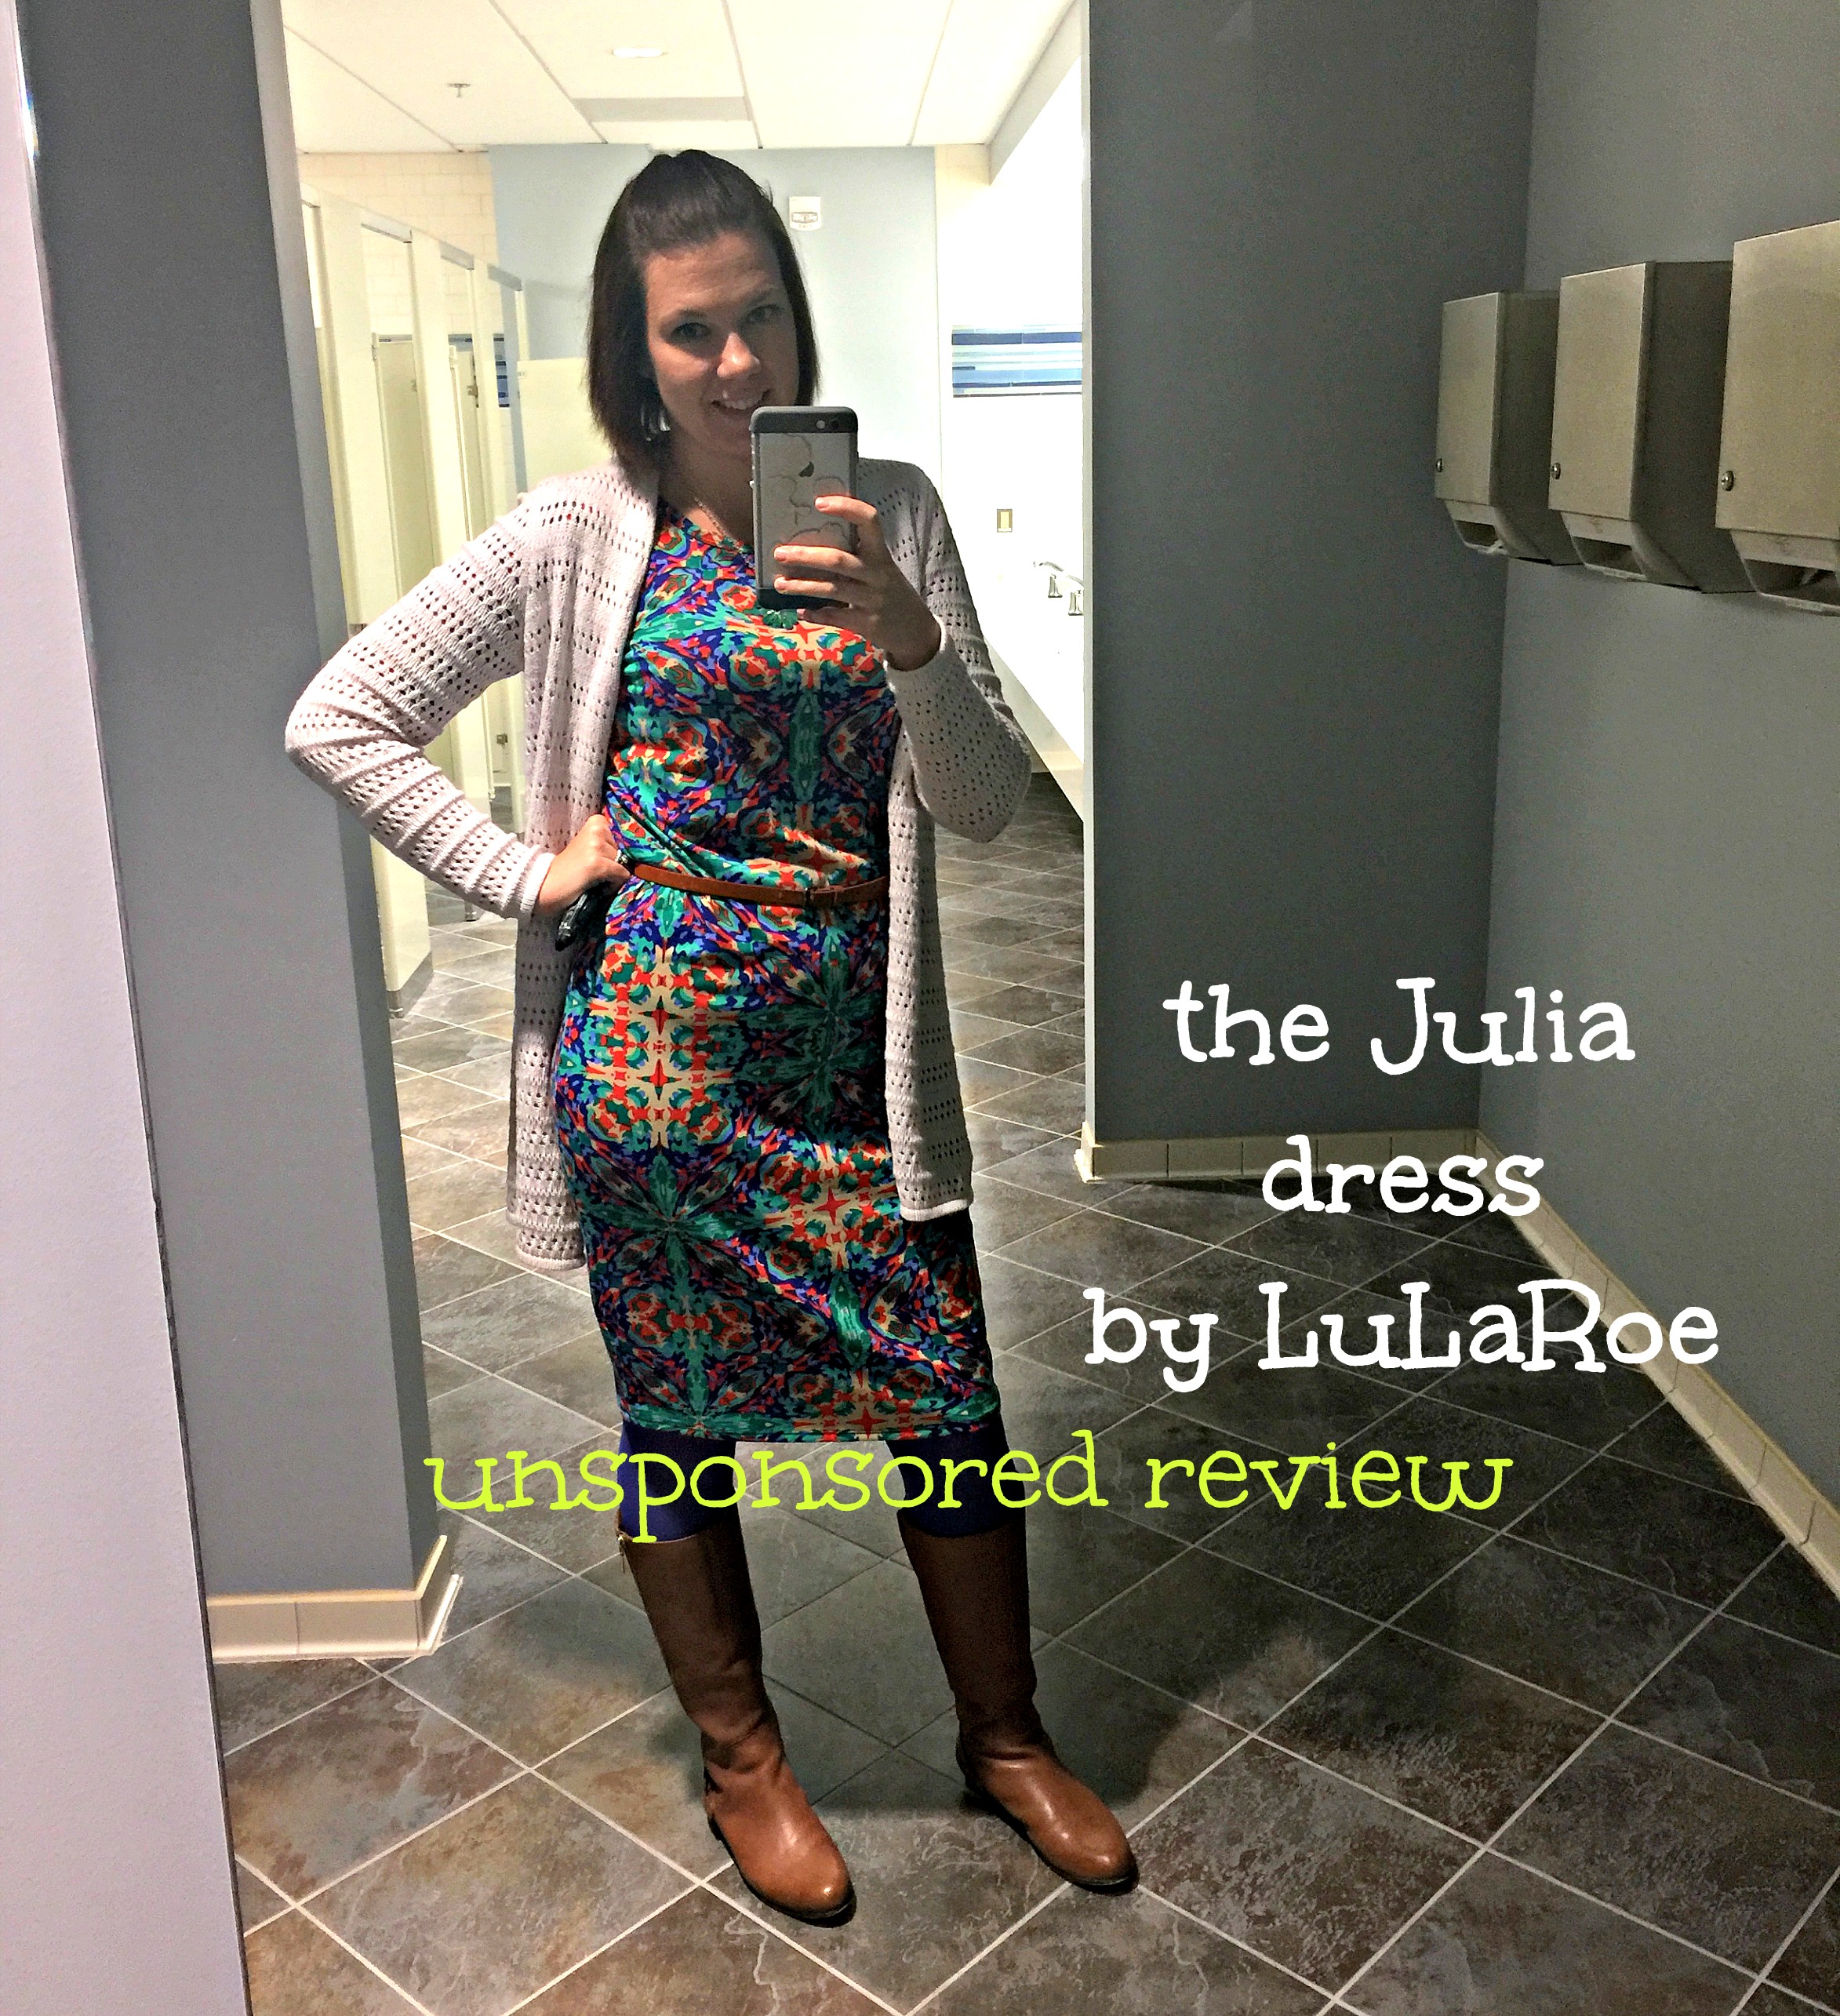 Tall and Curvy LuLaRoe leggings unboxing! 